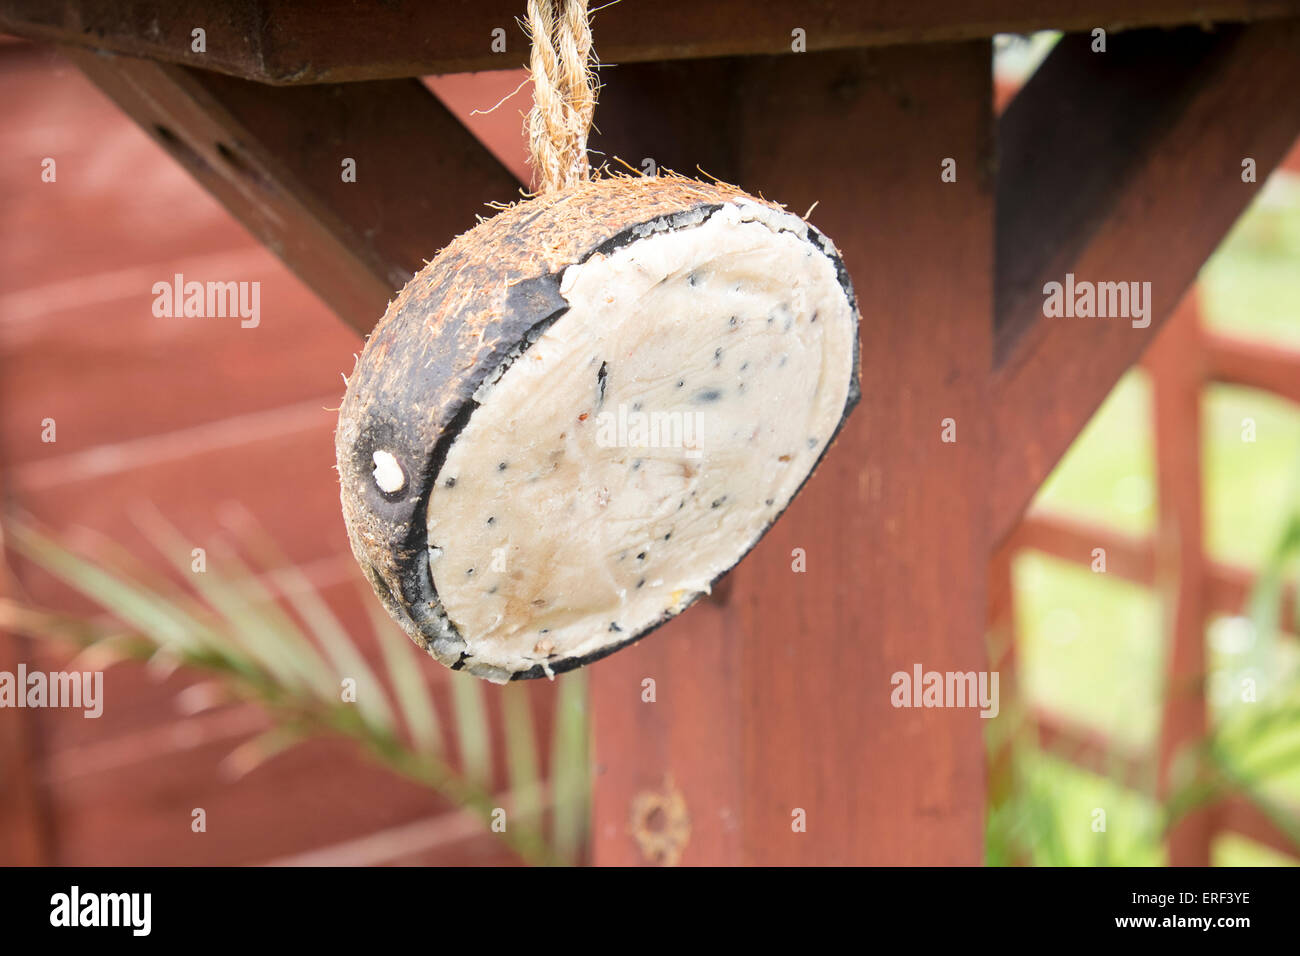 Coconut shell filled with fat and seeds for wild birds to eat, hanging from bird feeding table in UK garden Stock Photo